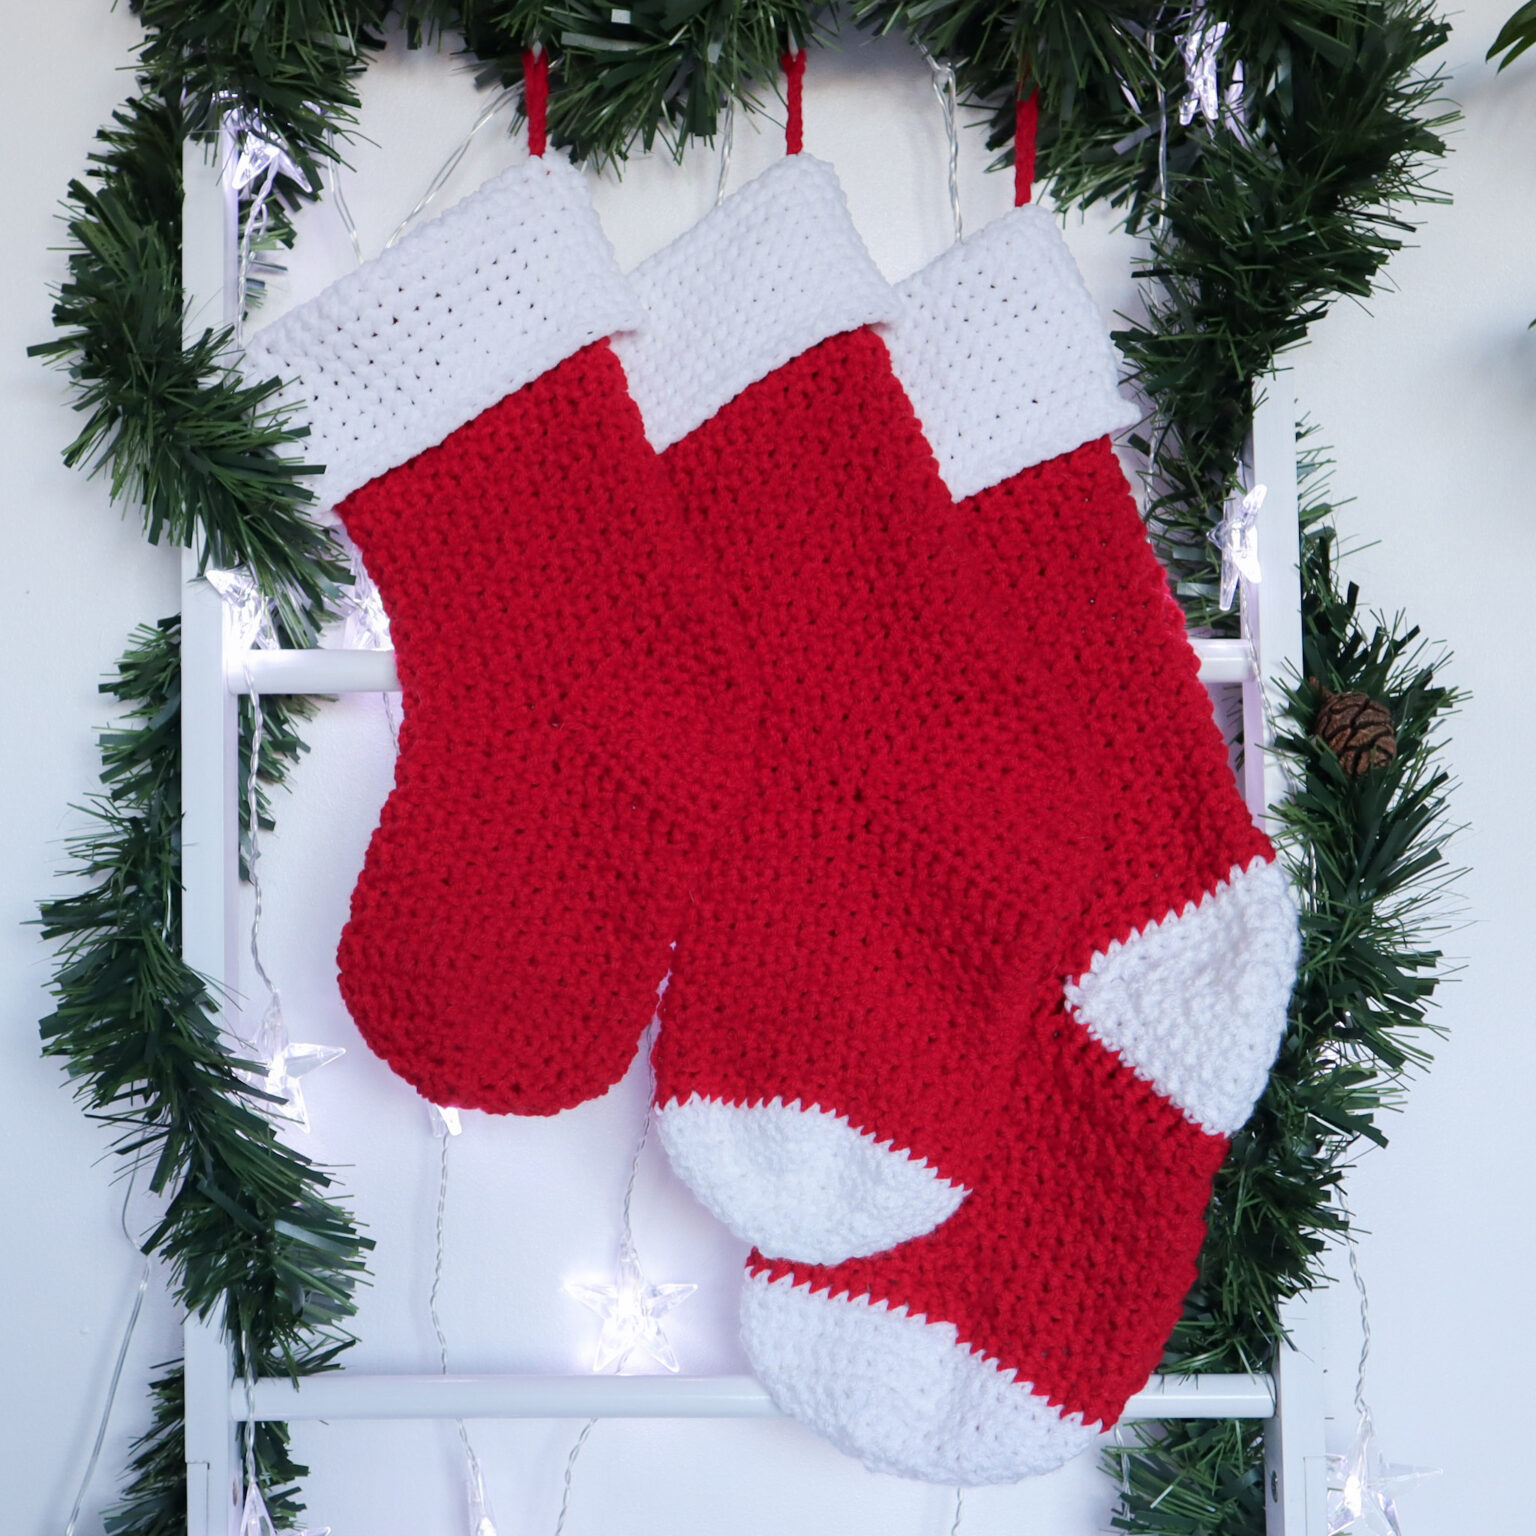 3 crochet stockings made in red and white yarn, hang in ascending order from small to large.